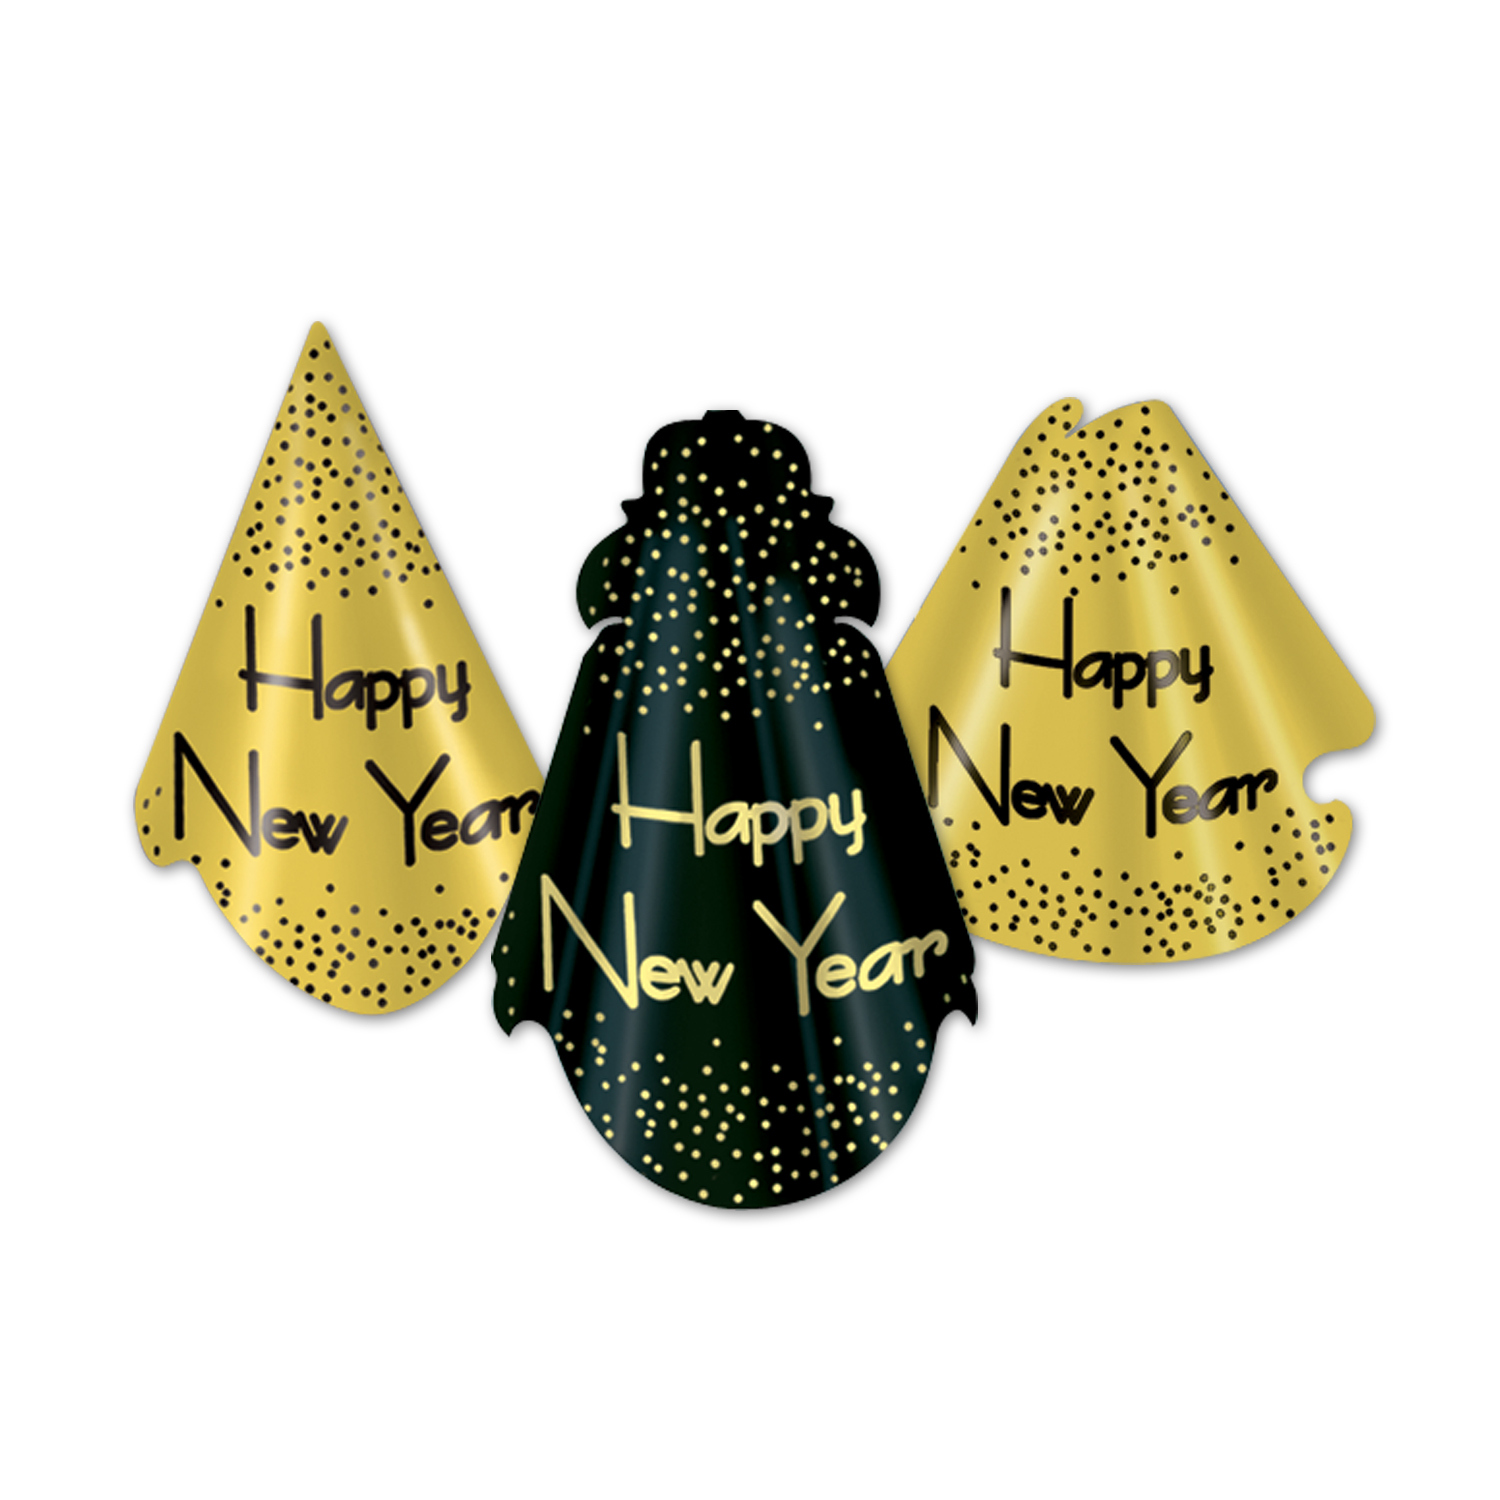 Traditional party hats with a gold or black background that comes with confetti accents and the words "Happy New Year".